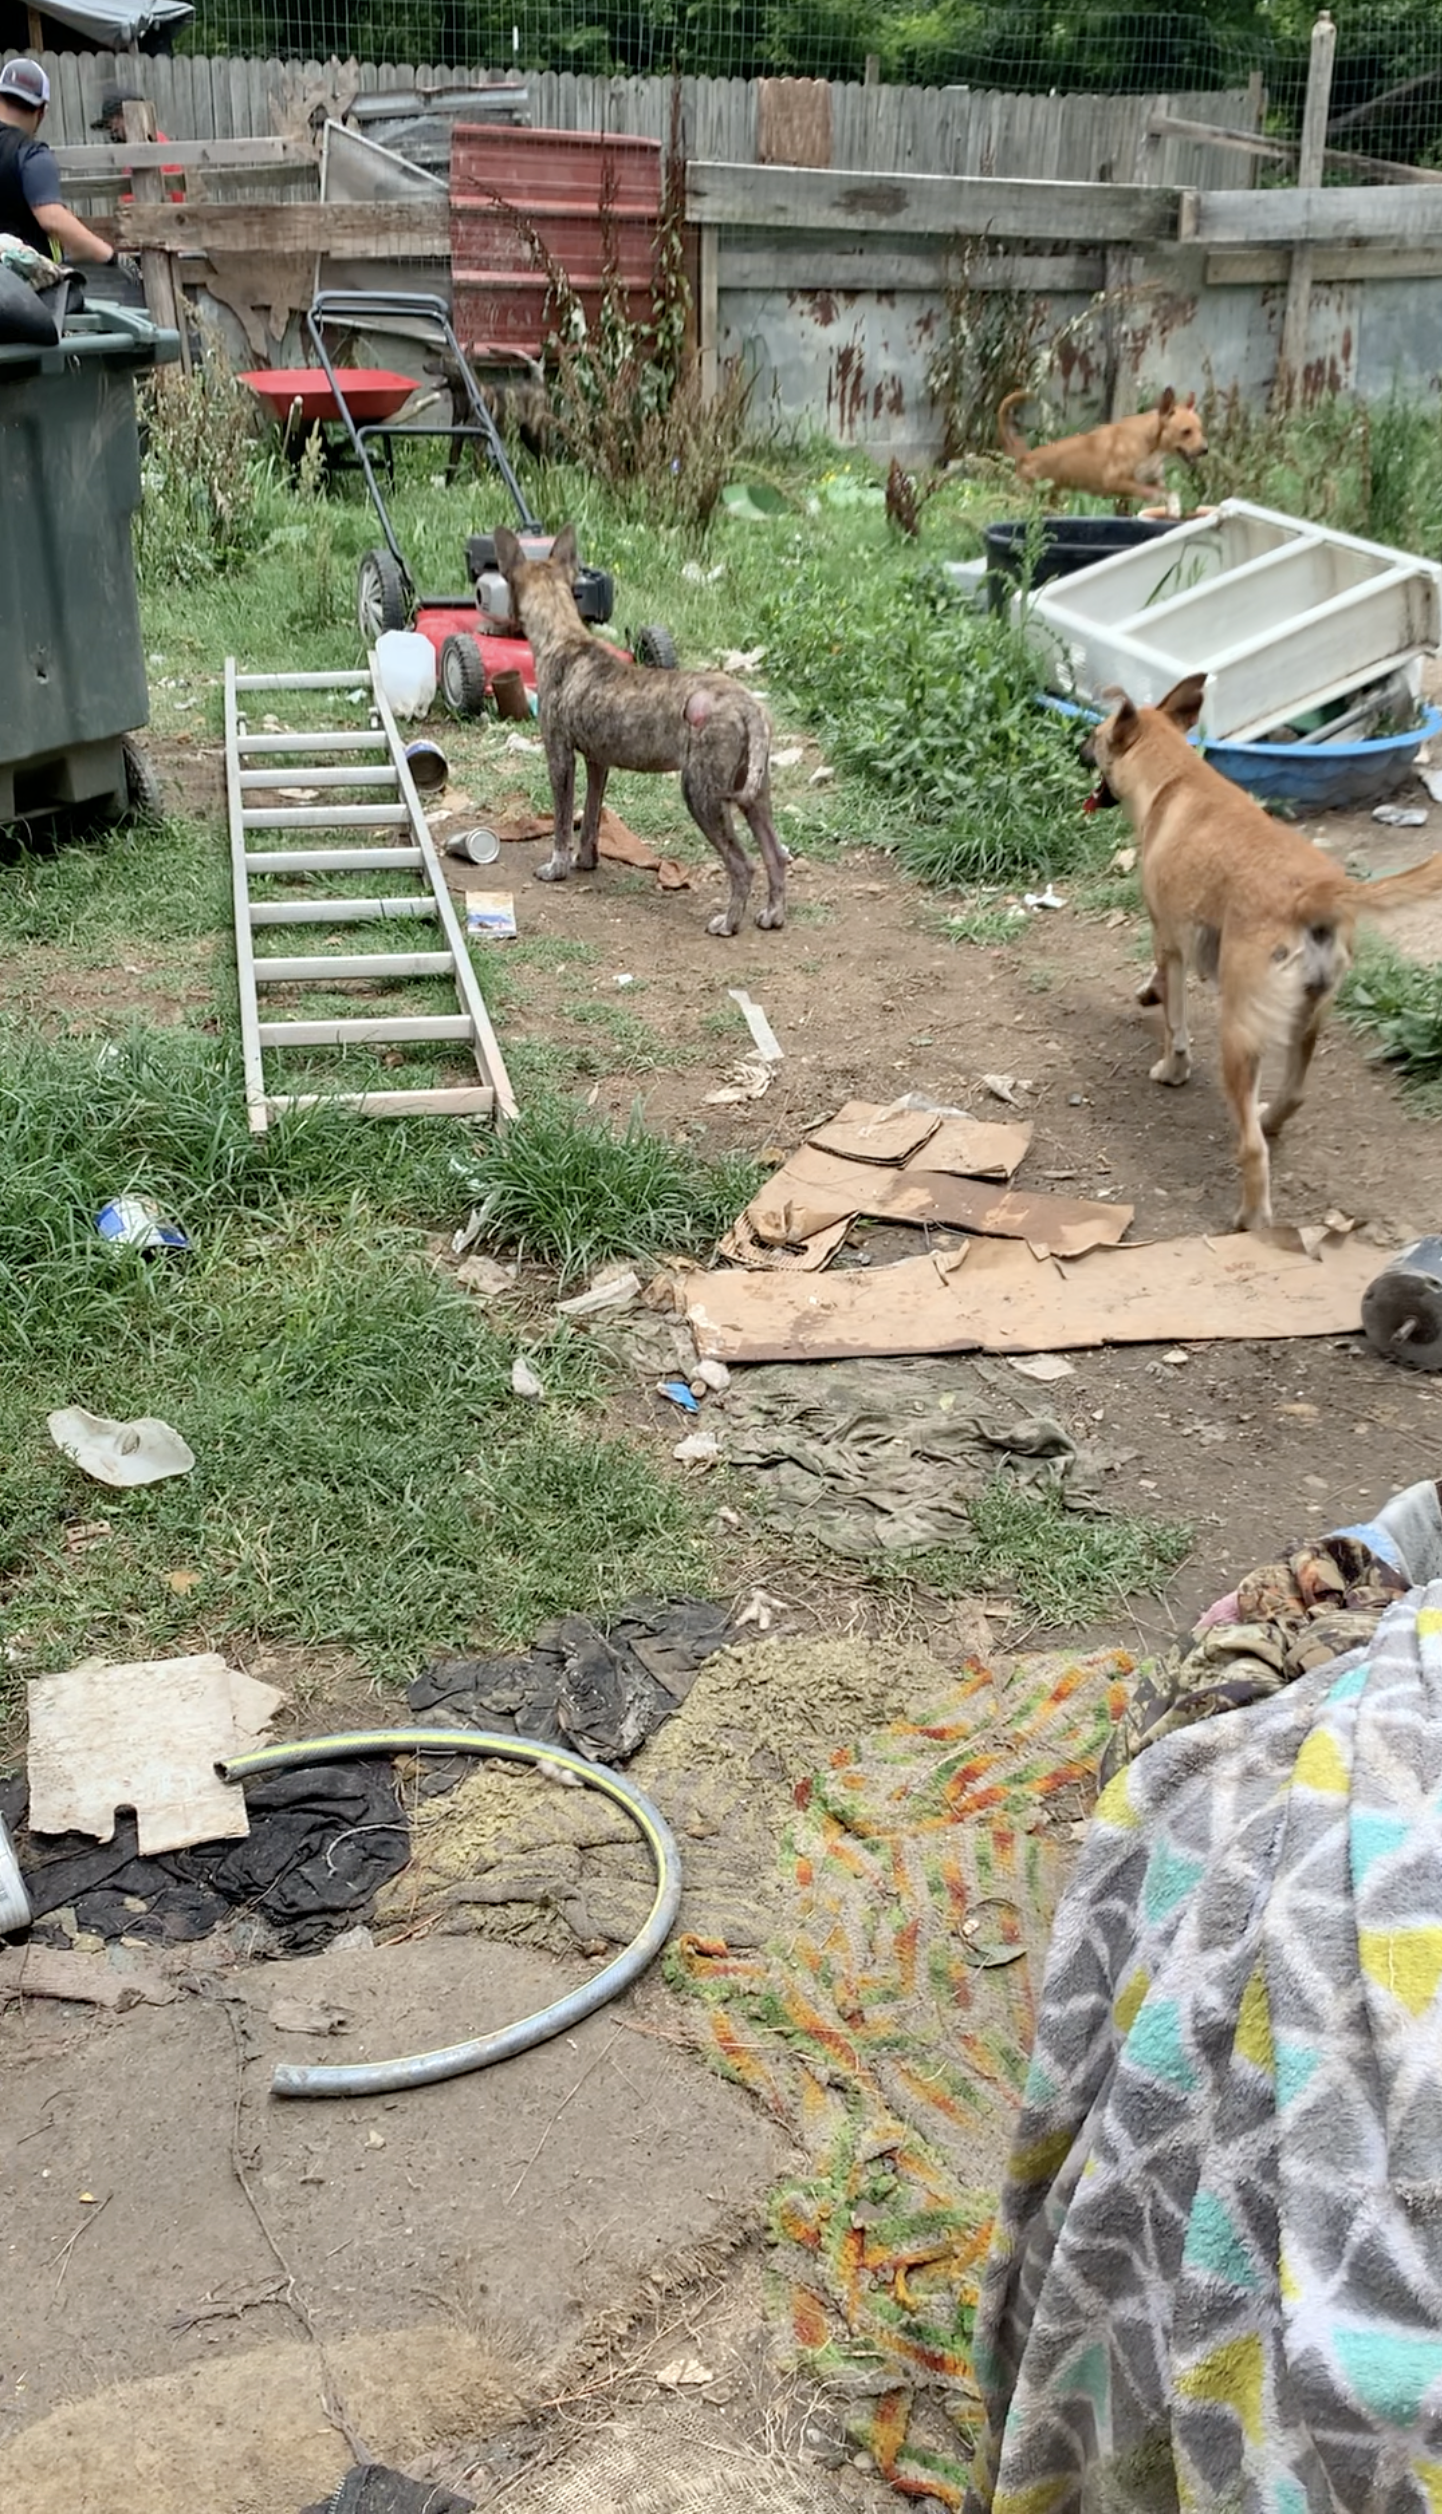 Several abandoned dogs wander an abandoned and decaying yard with a patched fence and trash on the ground during ARC's emergency rescue.